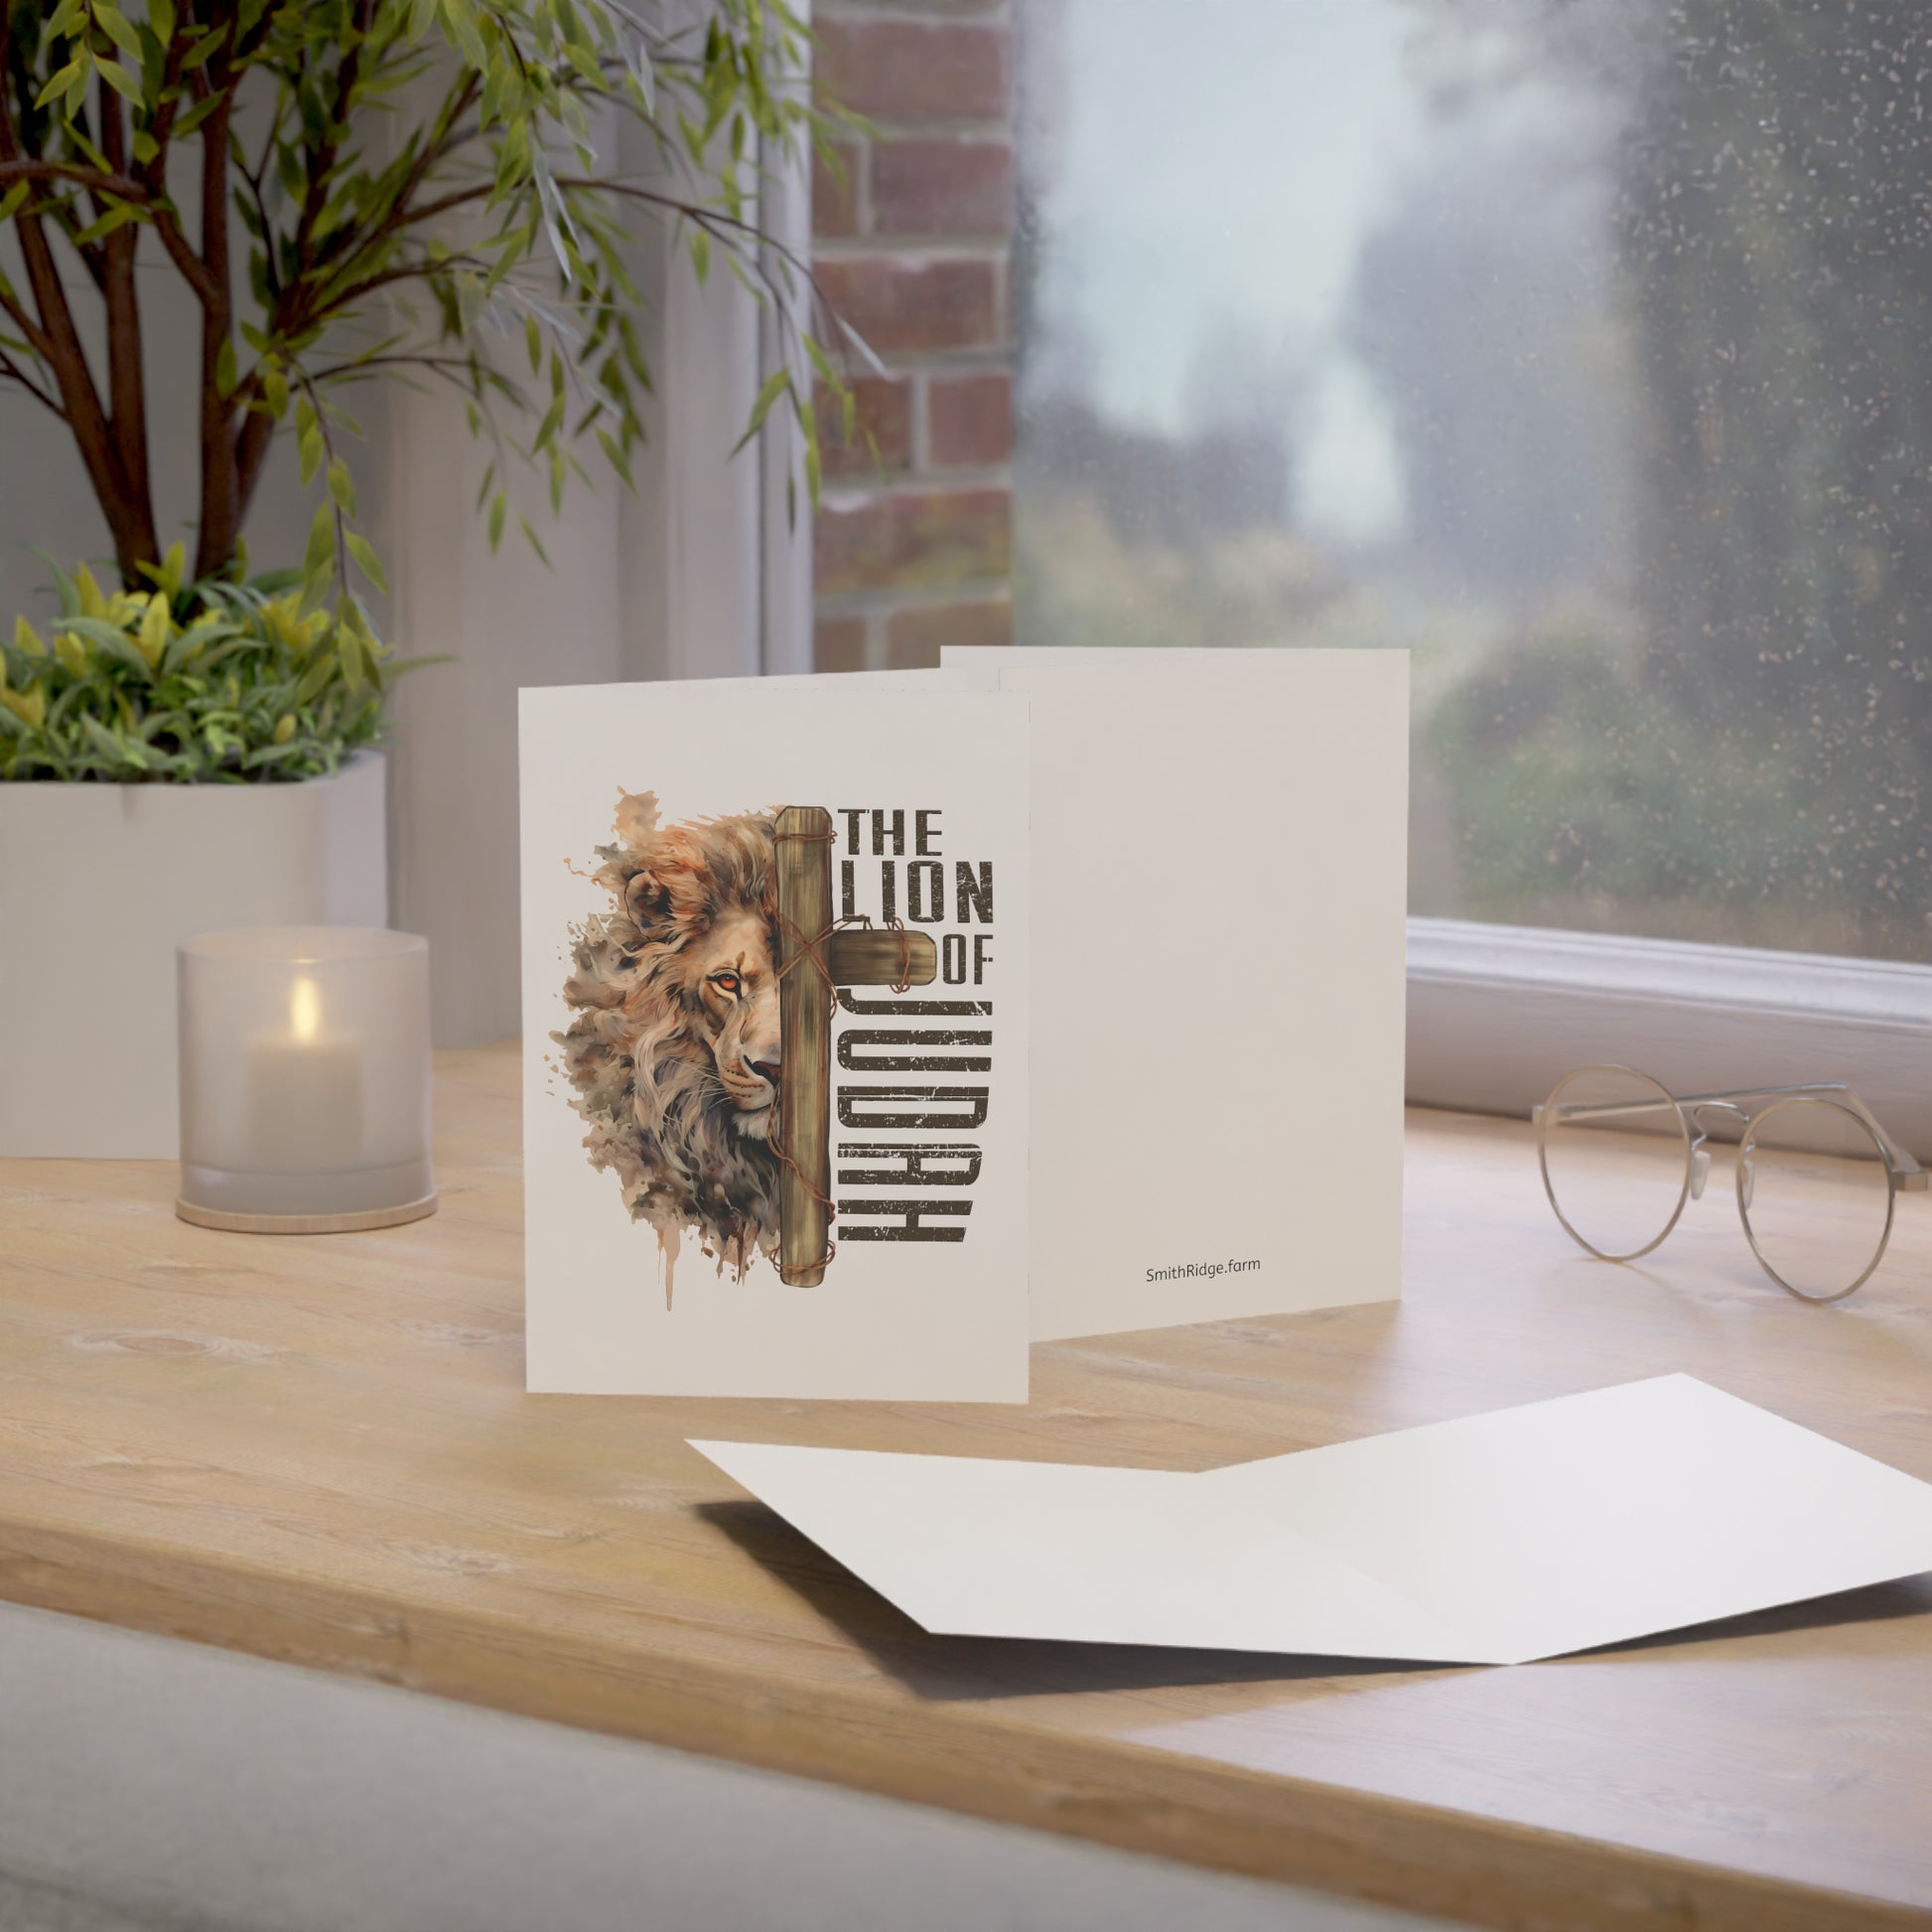 The Lion of Judah Greeting Cards are available in 5" x 7", blank on the inside, and come with envelopes. Perfect for any Holiday or Event. Shop SmithRidge.farm